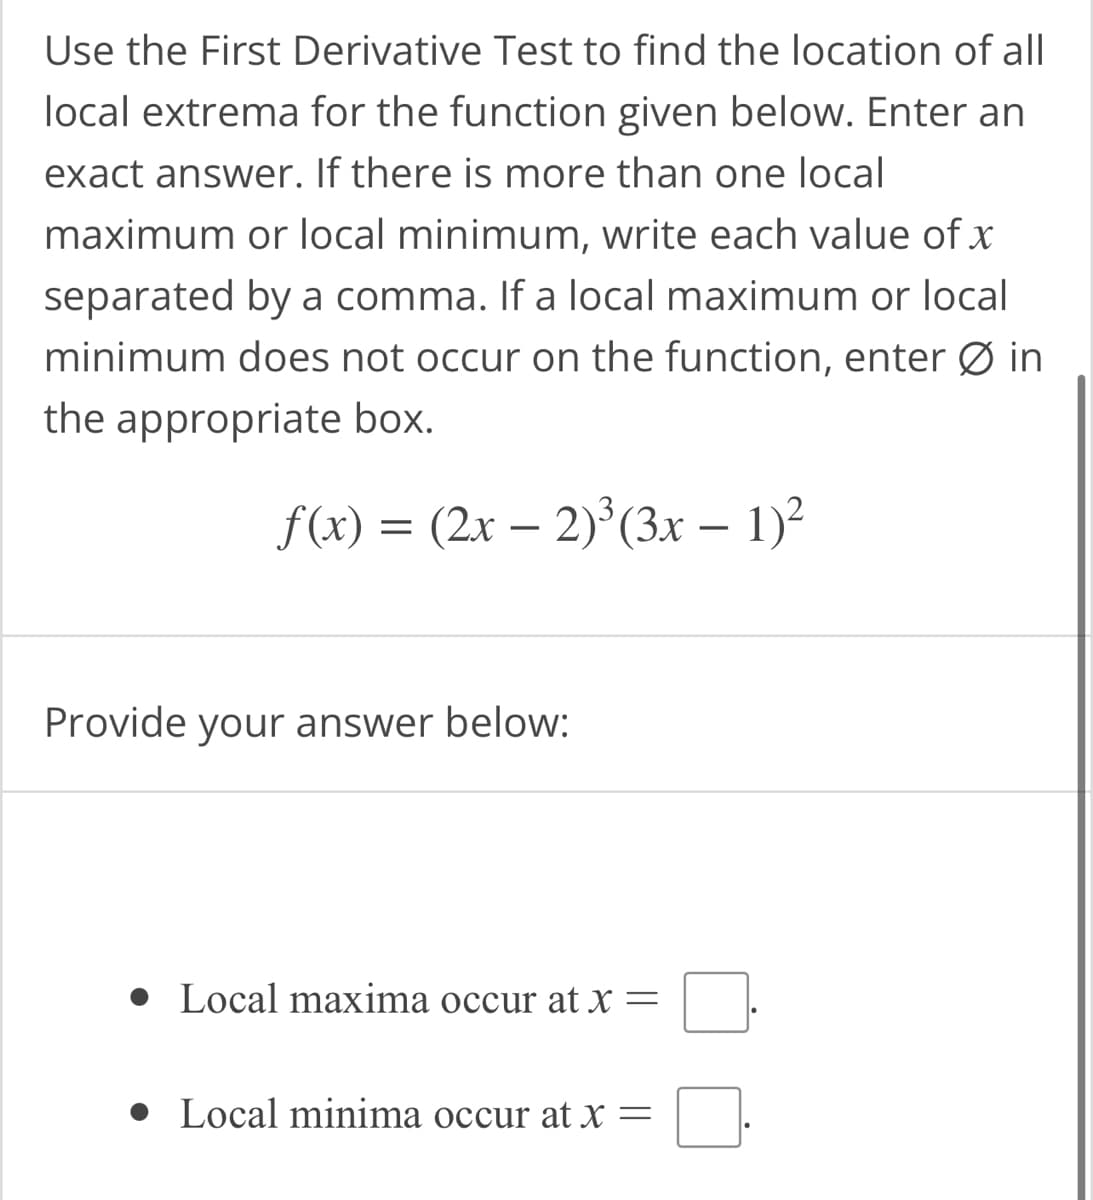 Use the First Derivative Test to find the location of all
local extrema for the function given below. Enter an
exact answer. If there is more than one local
maximum or local minimum, write each value of x
separated by a comma. If a local maximum or local
minimum does not occur on the function, enter Ø in
the appropriate box.
f(x) = (2x − 2)³(3x − 1)²
Provide your answer below:
• Local maxima occur at x =
● Local minima occur at x =